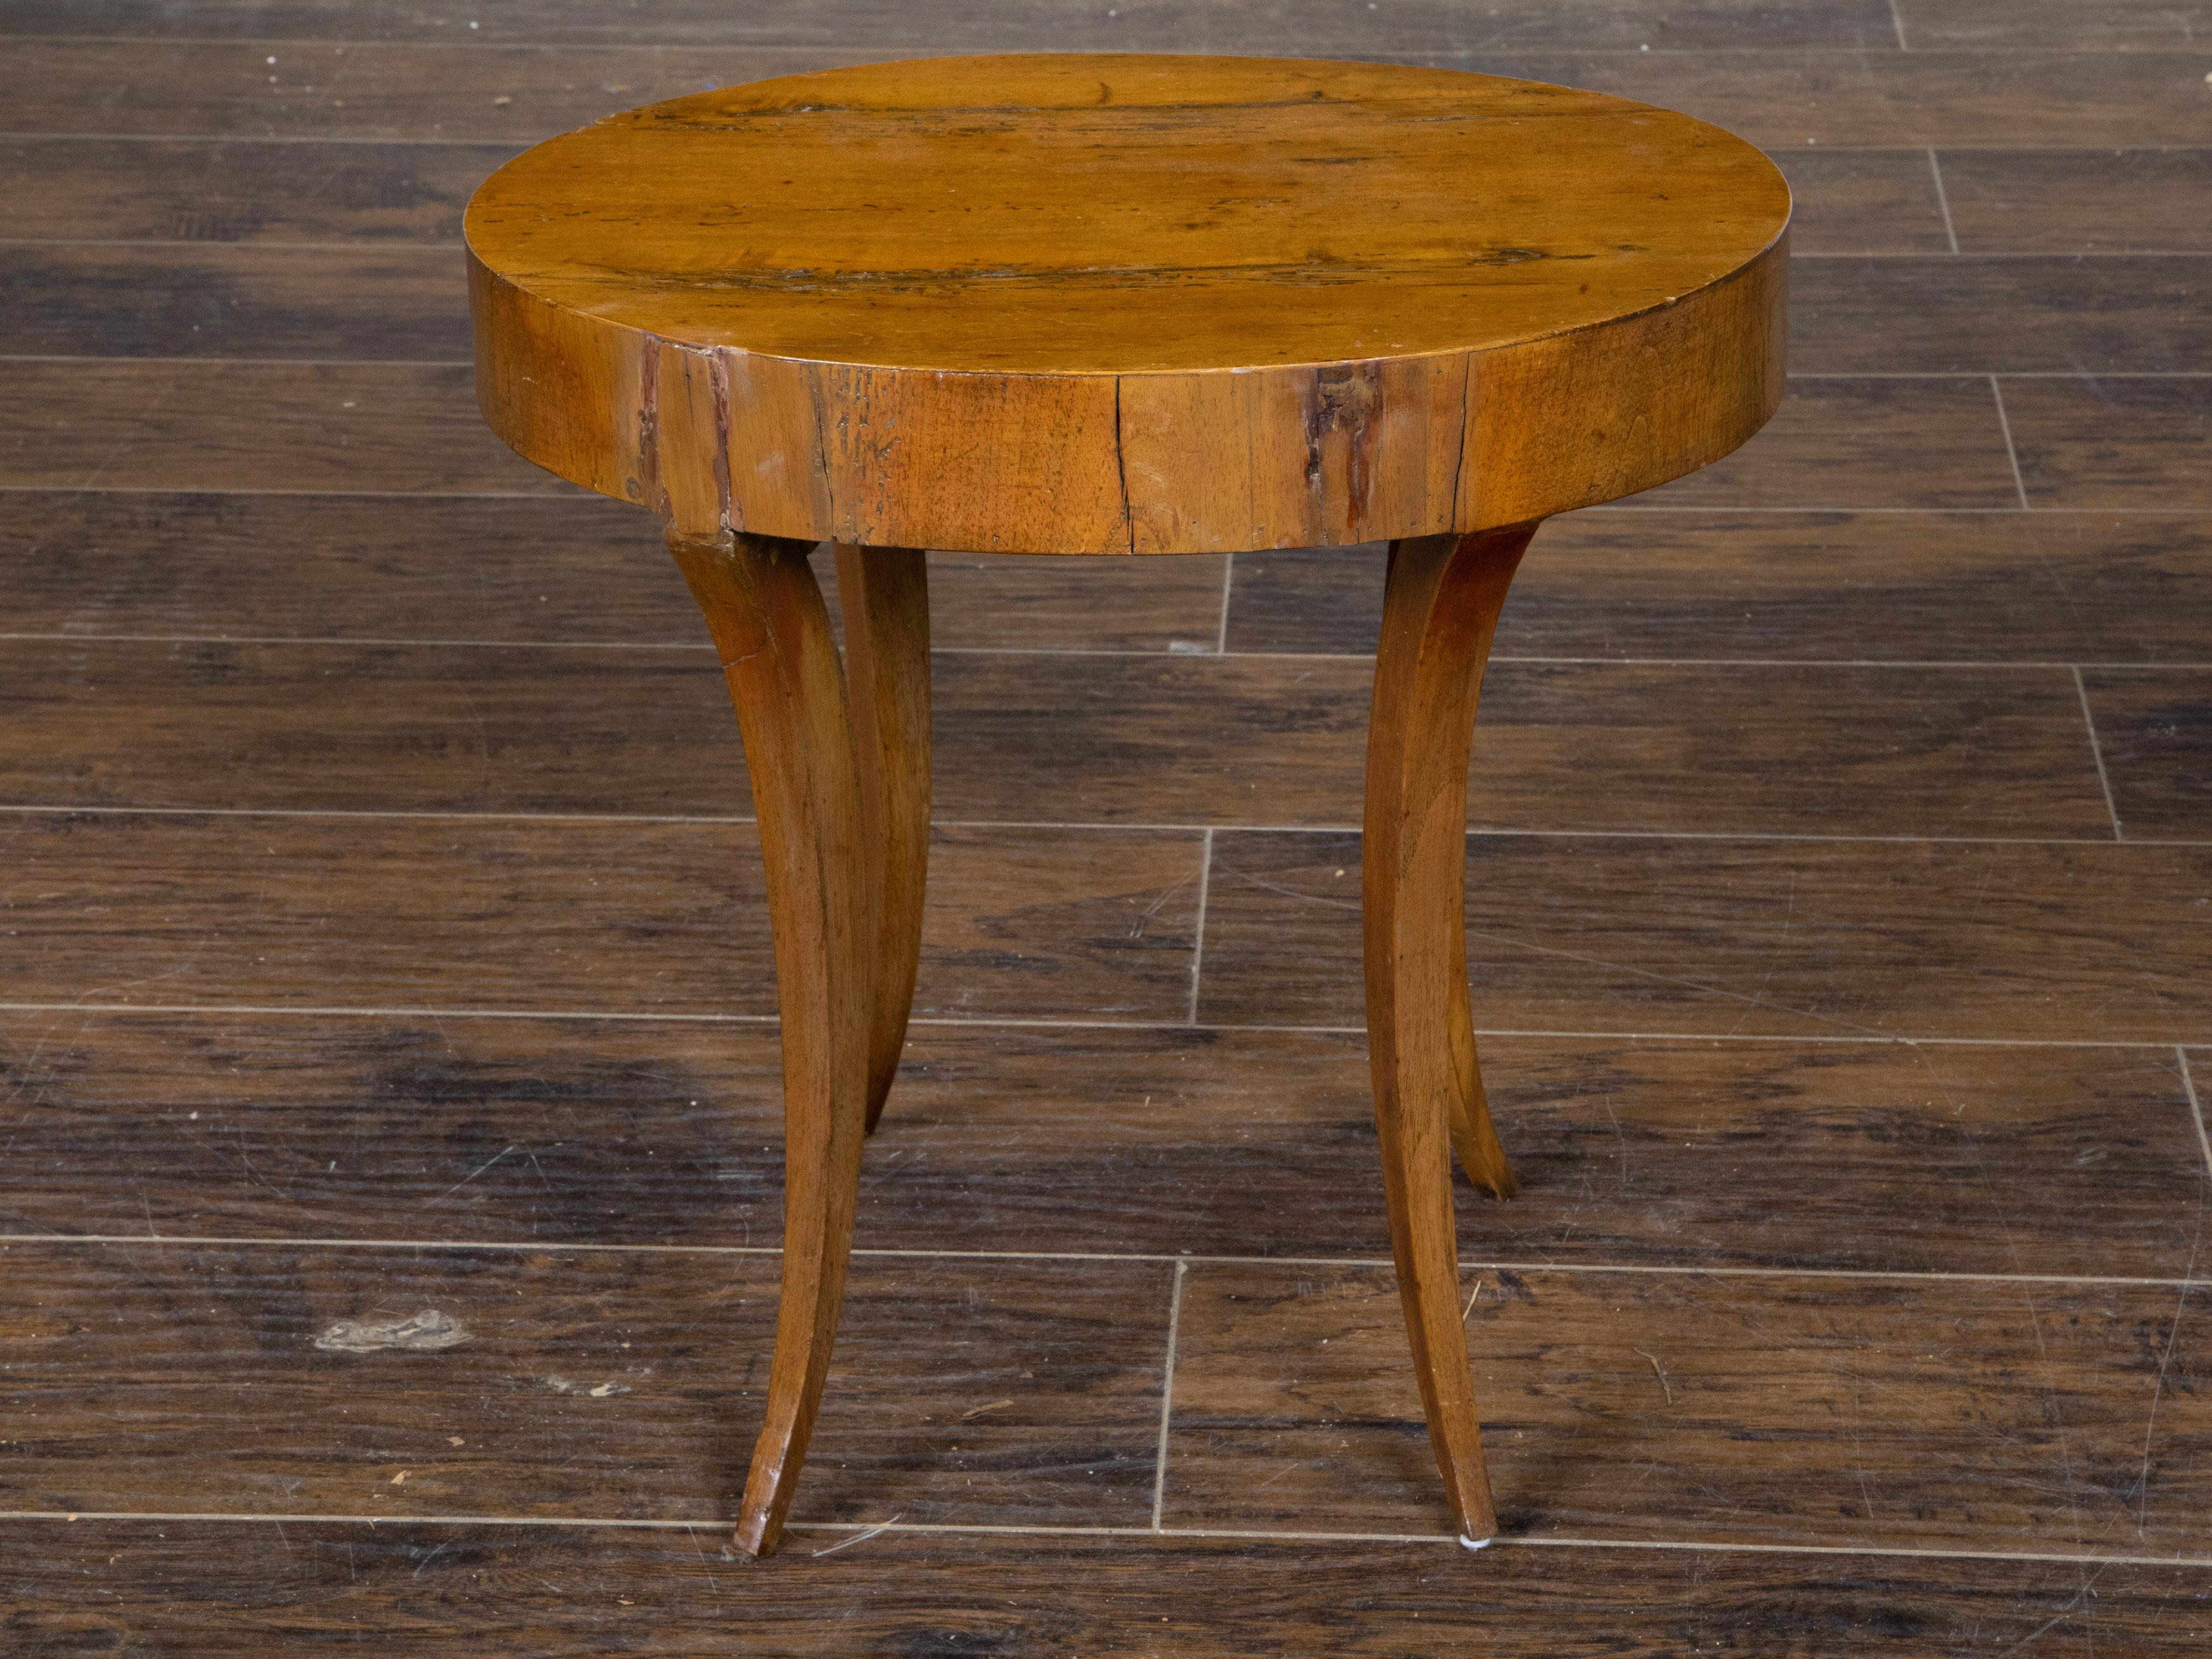 Italian Neoclassical 1810s Walnut Table with Oval Top, Drawer and Saber Legs For Sale 2